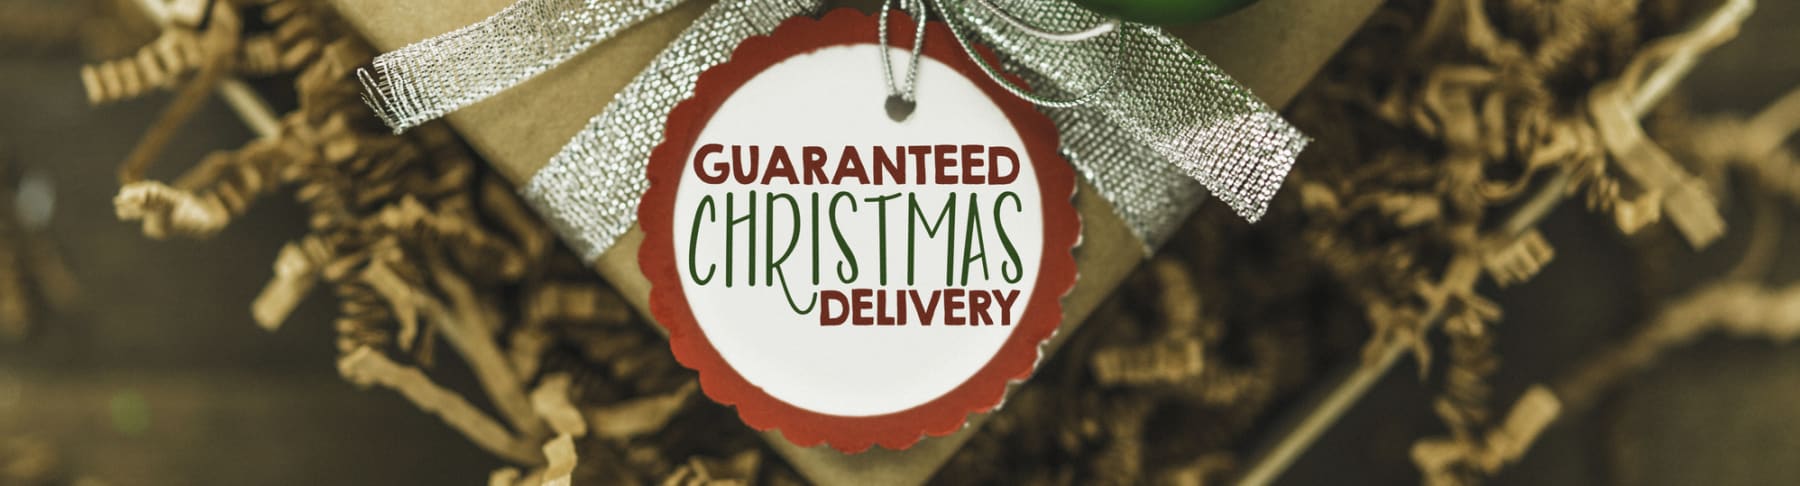 Gift box with Guaranteed Christmas Delivery tag attached.